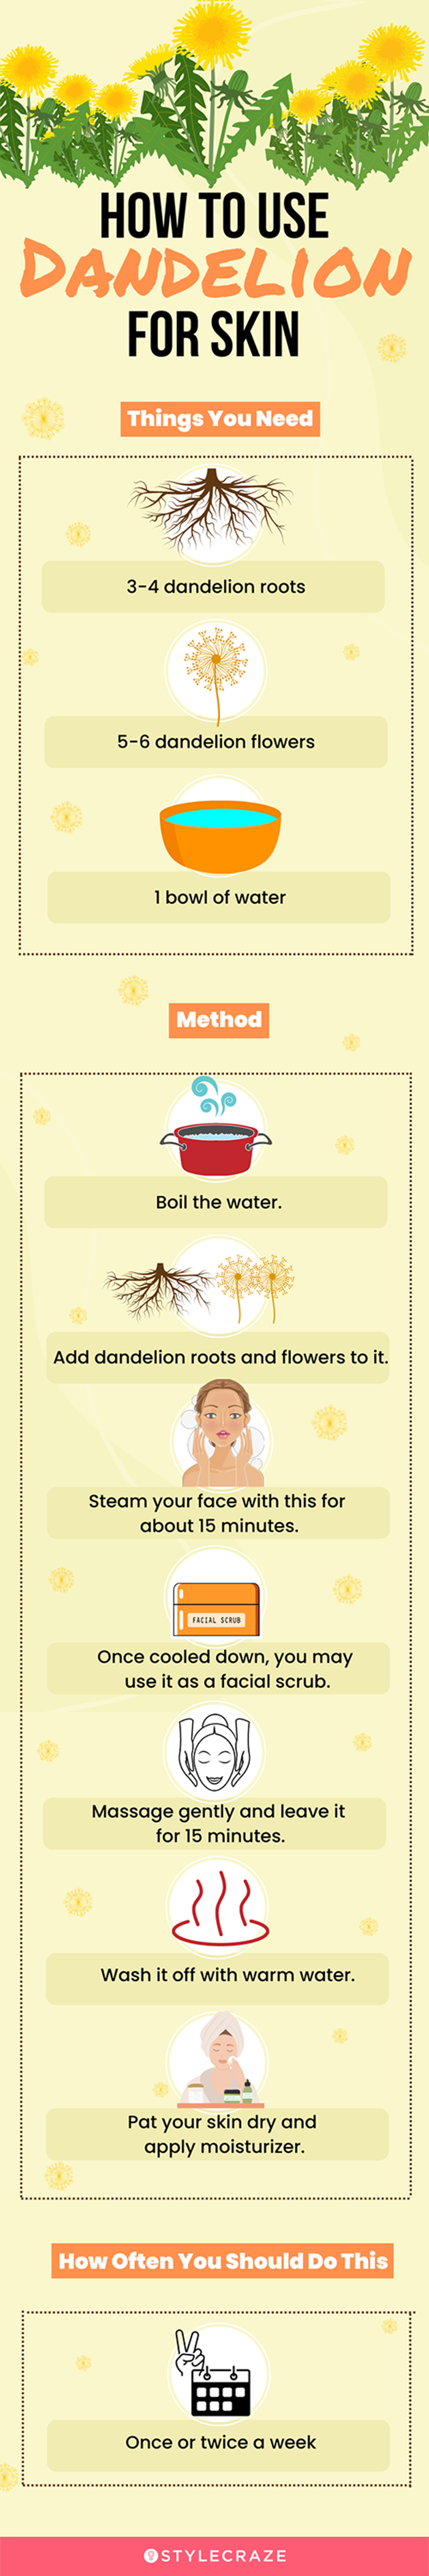 how to use dandelion for skin [infographic]